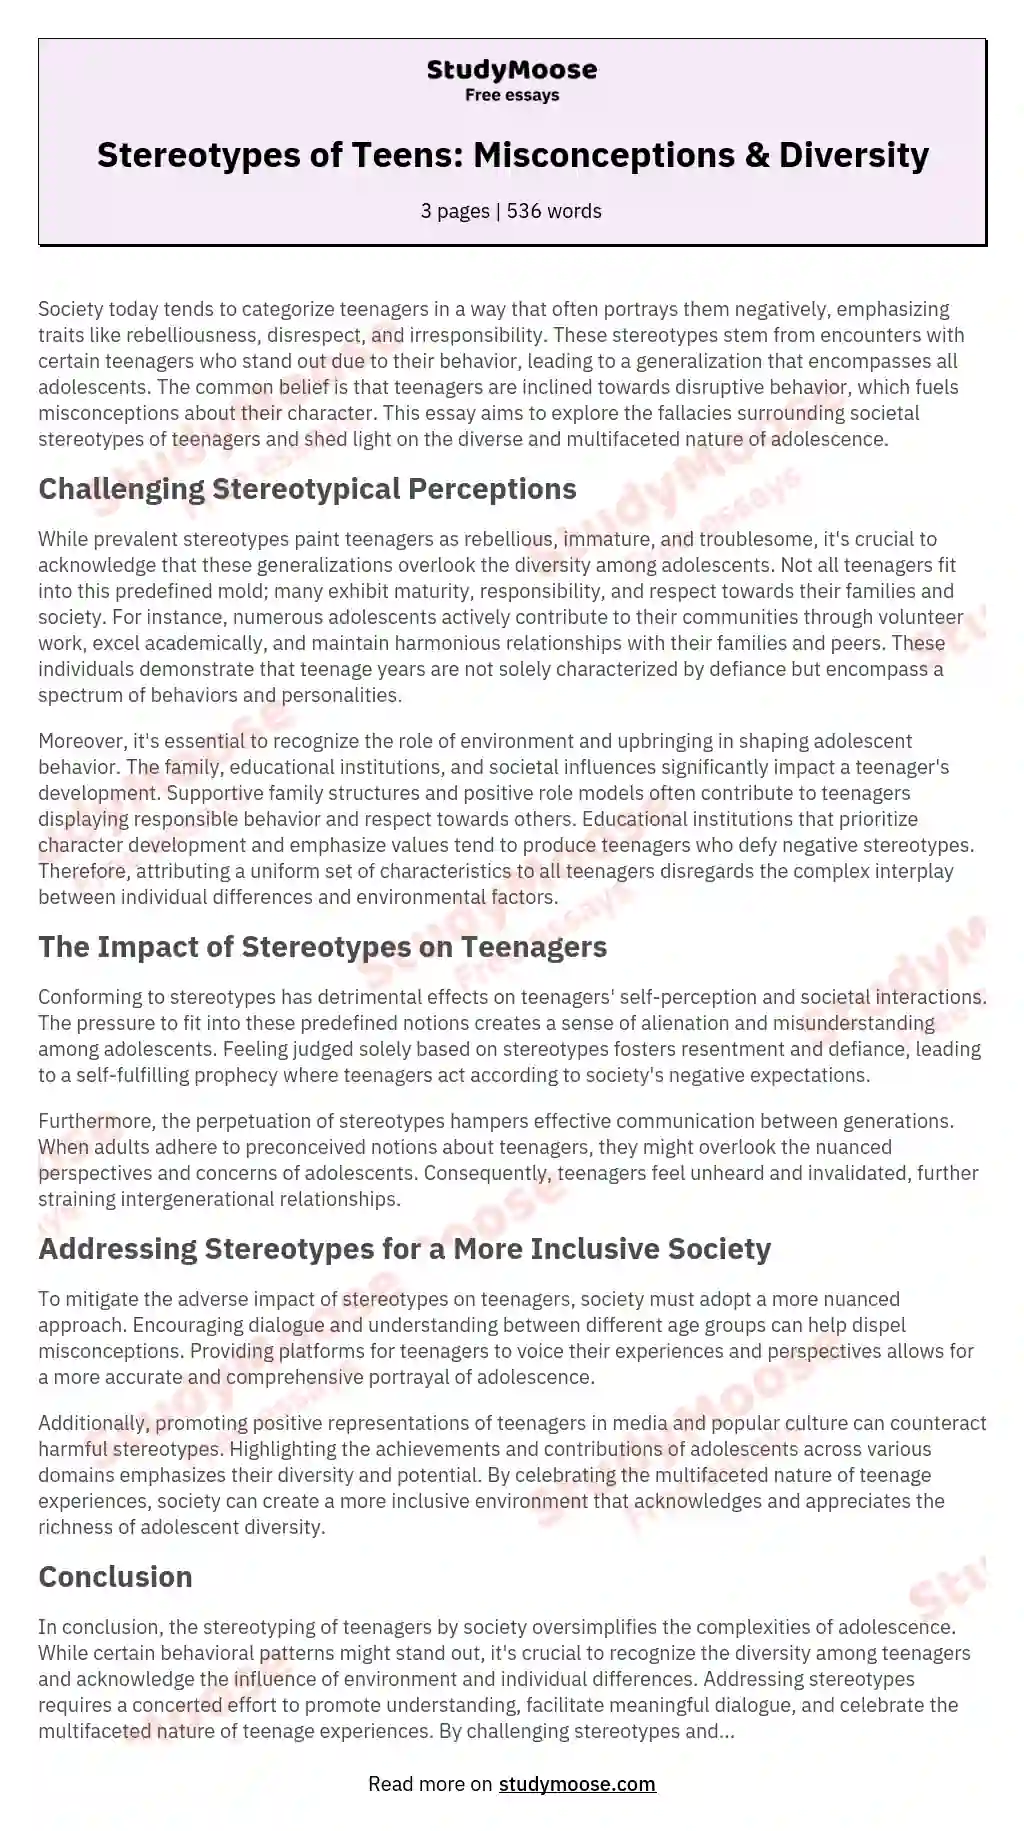 Stereotypes of Teens: Misconceptions & Diversity essay